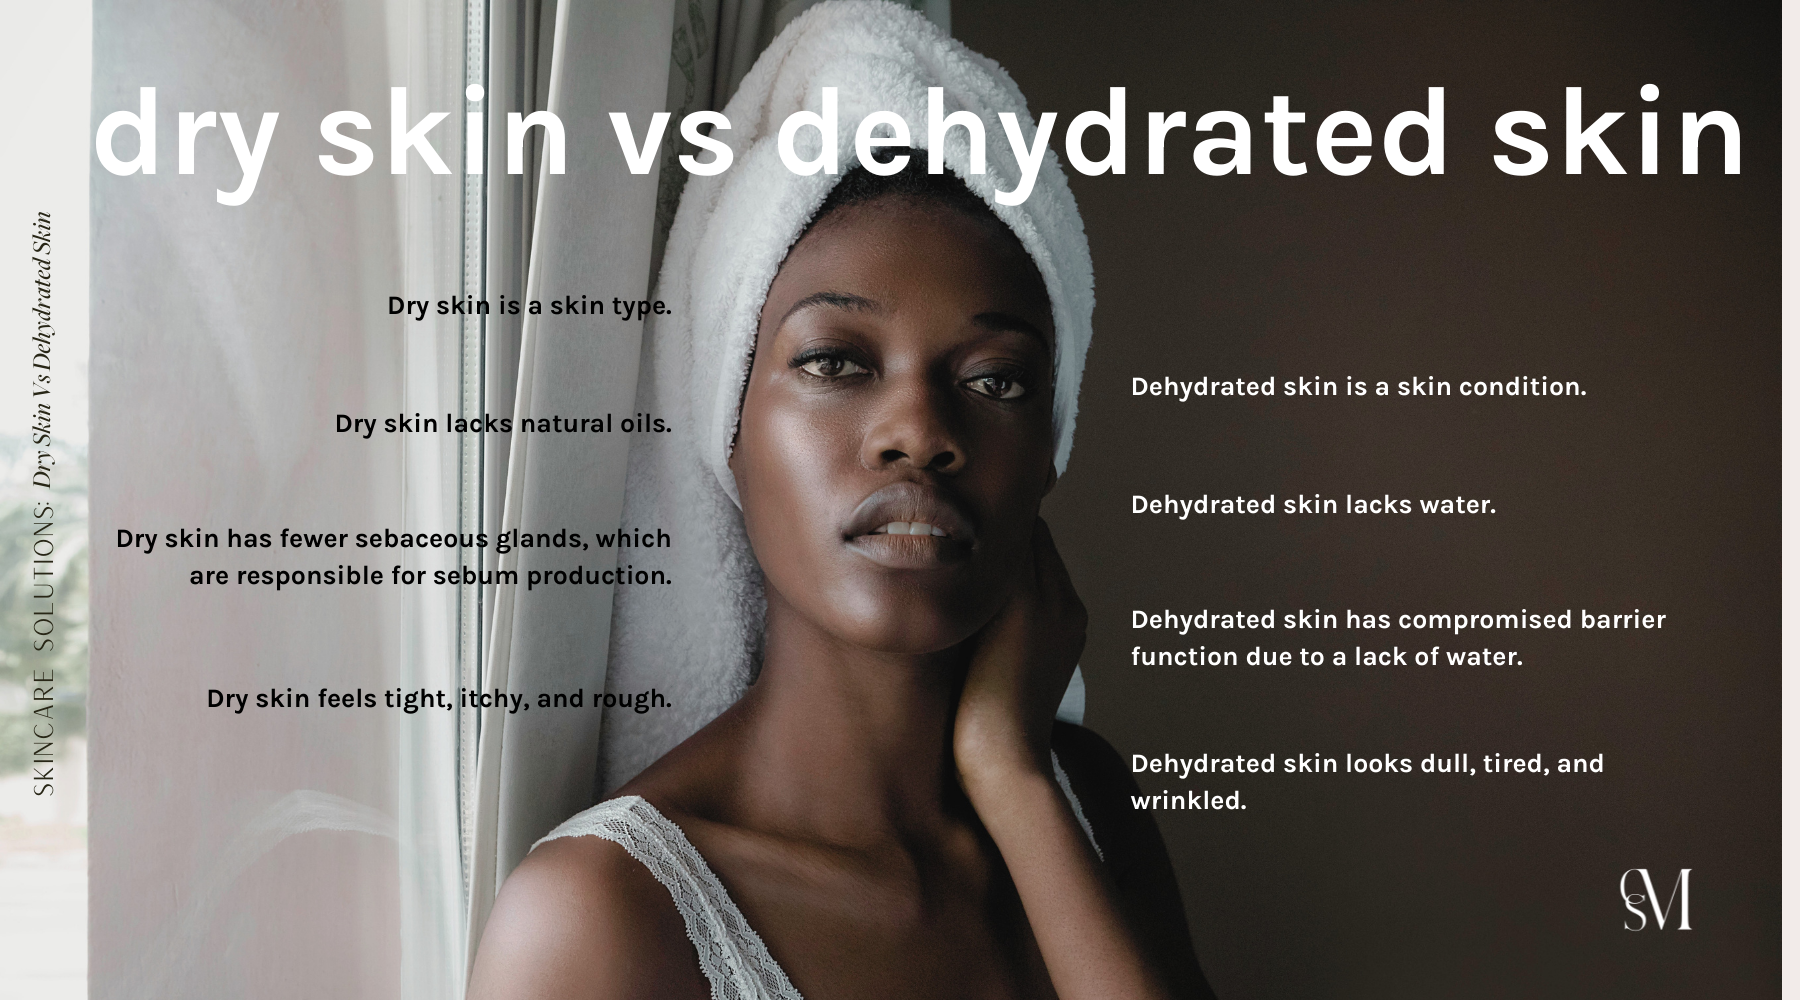 The key differences you need to understand between dry skin and dehydrated skin. 